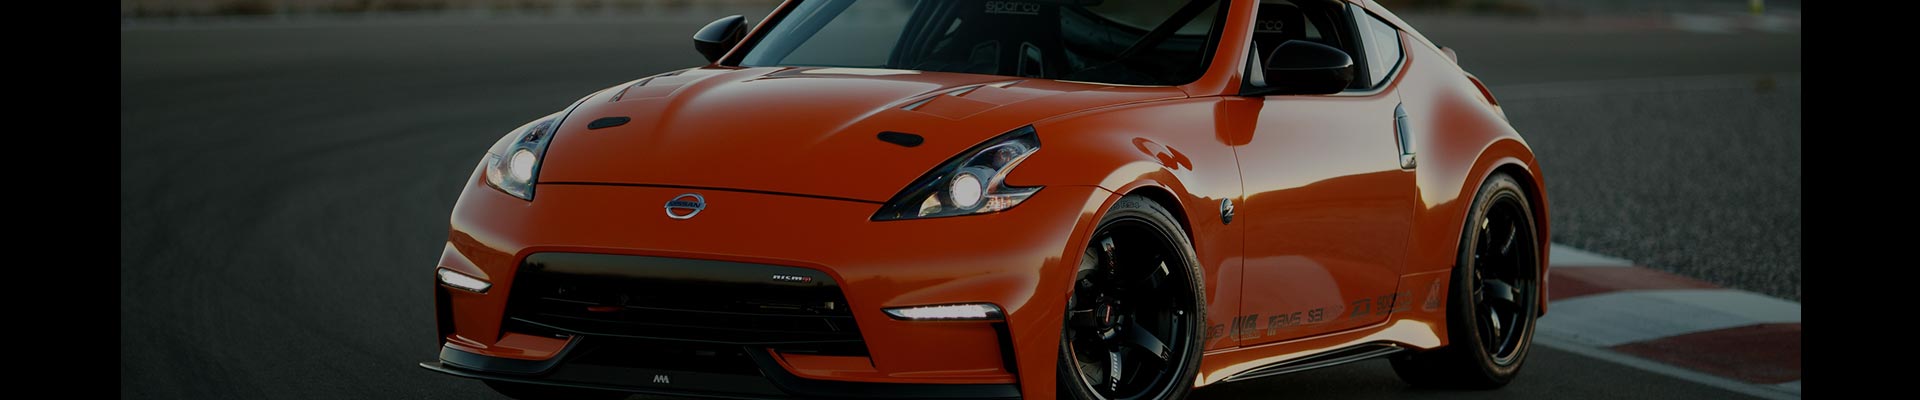 Shop Replacement and OEM 2015 Nissan 370Z Parts with Discounted Price on the Net